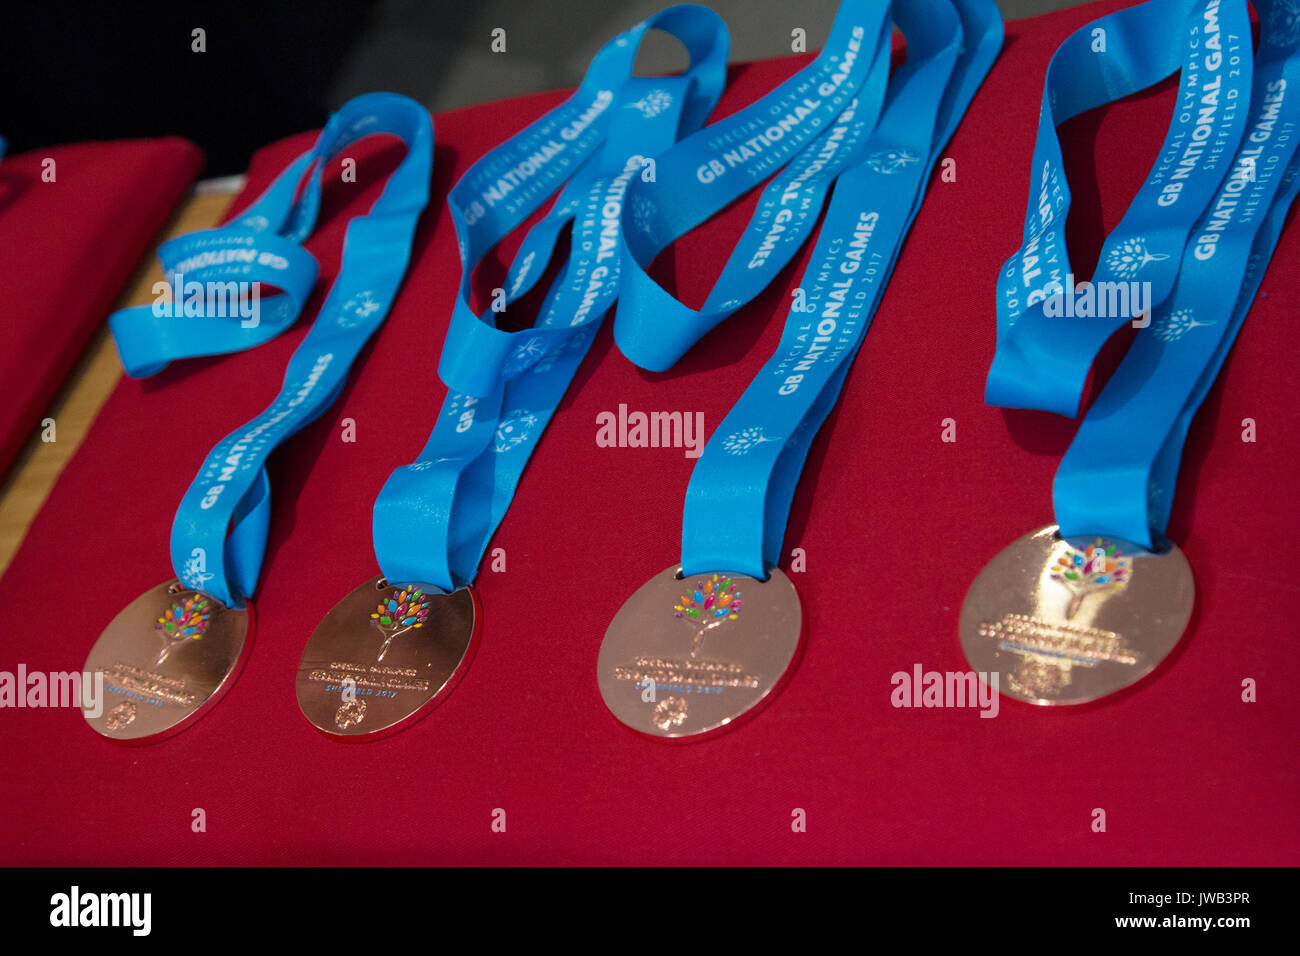 Medals of UK Special Olympics in Sheffield, United Kingdom on August 10, 2017 Stock Photo